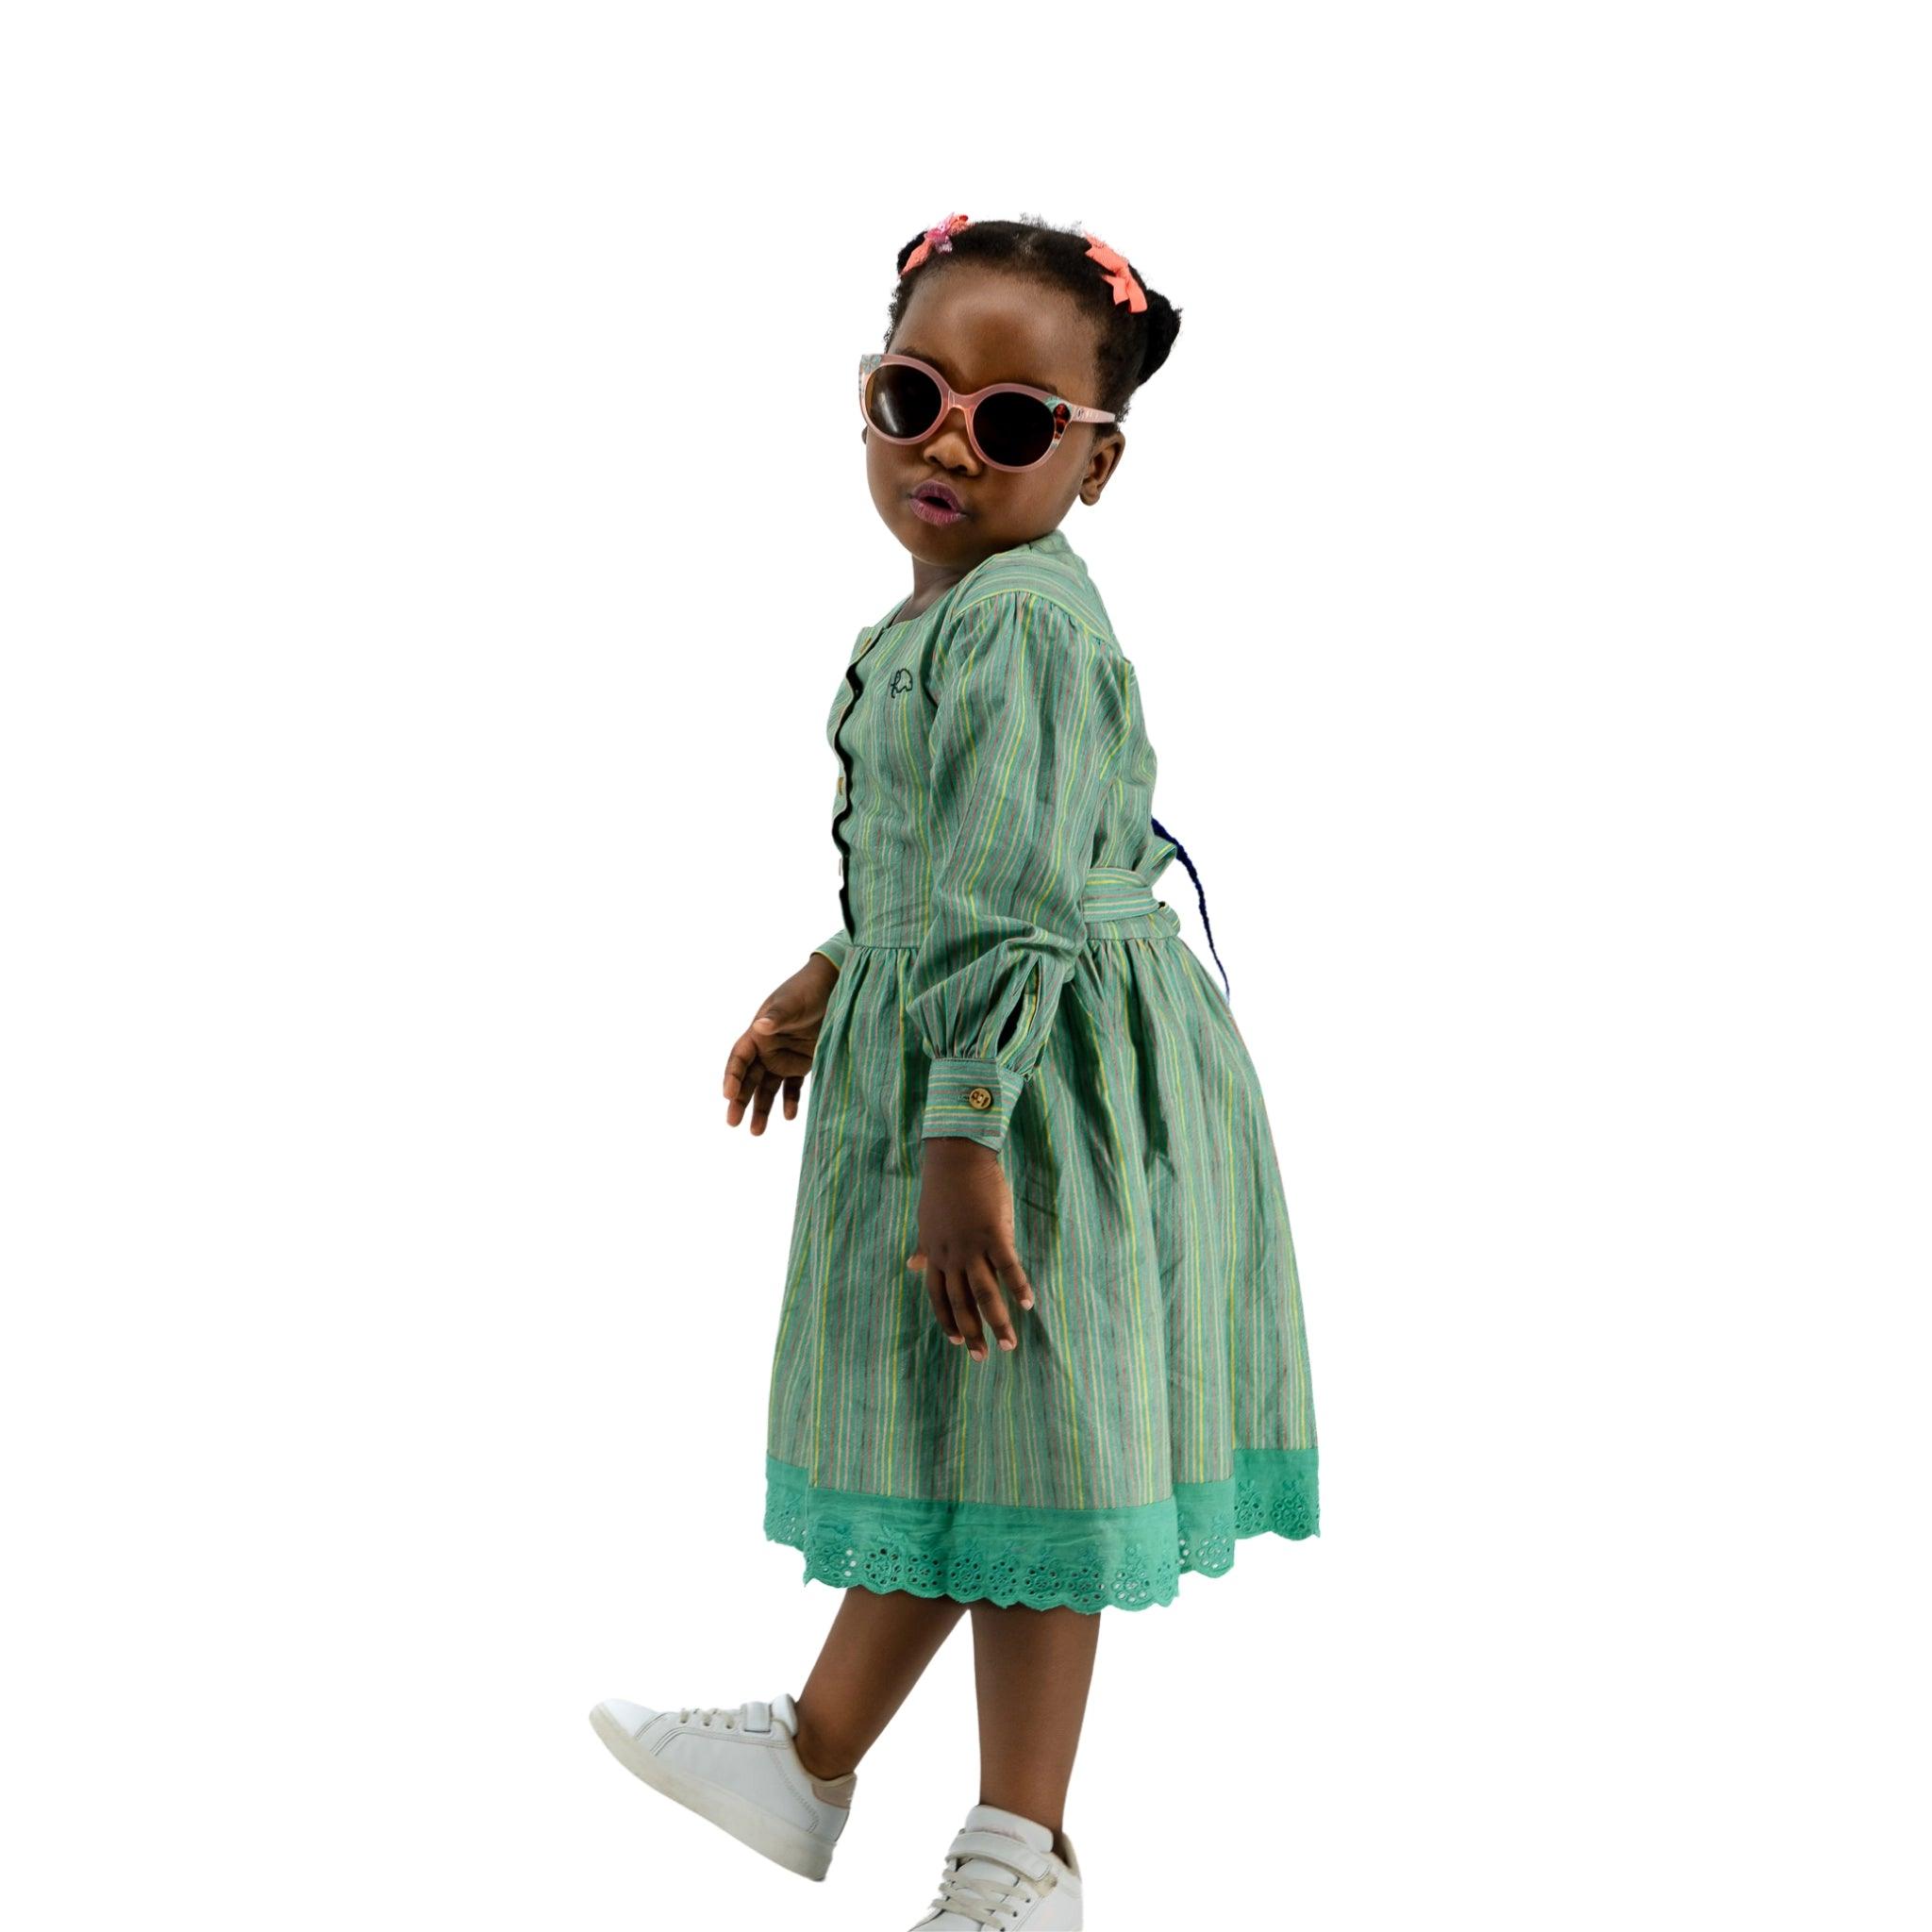 A young girl in a Karee Green Striped Long Puff Sleeve Cotton Dress and white sneakers, wearing sunglasses and hair clips, standing confidently against a white background.